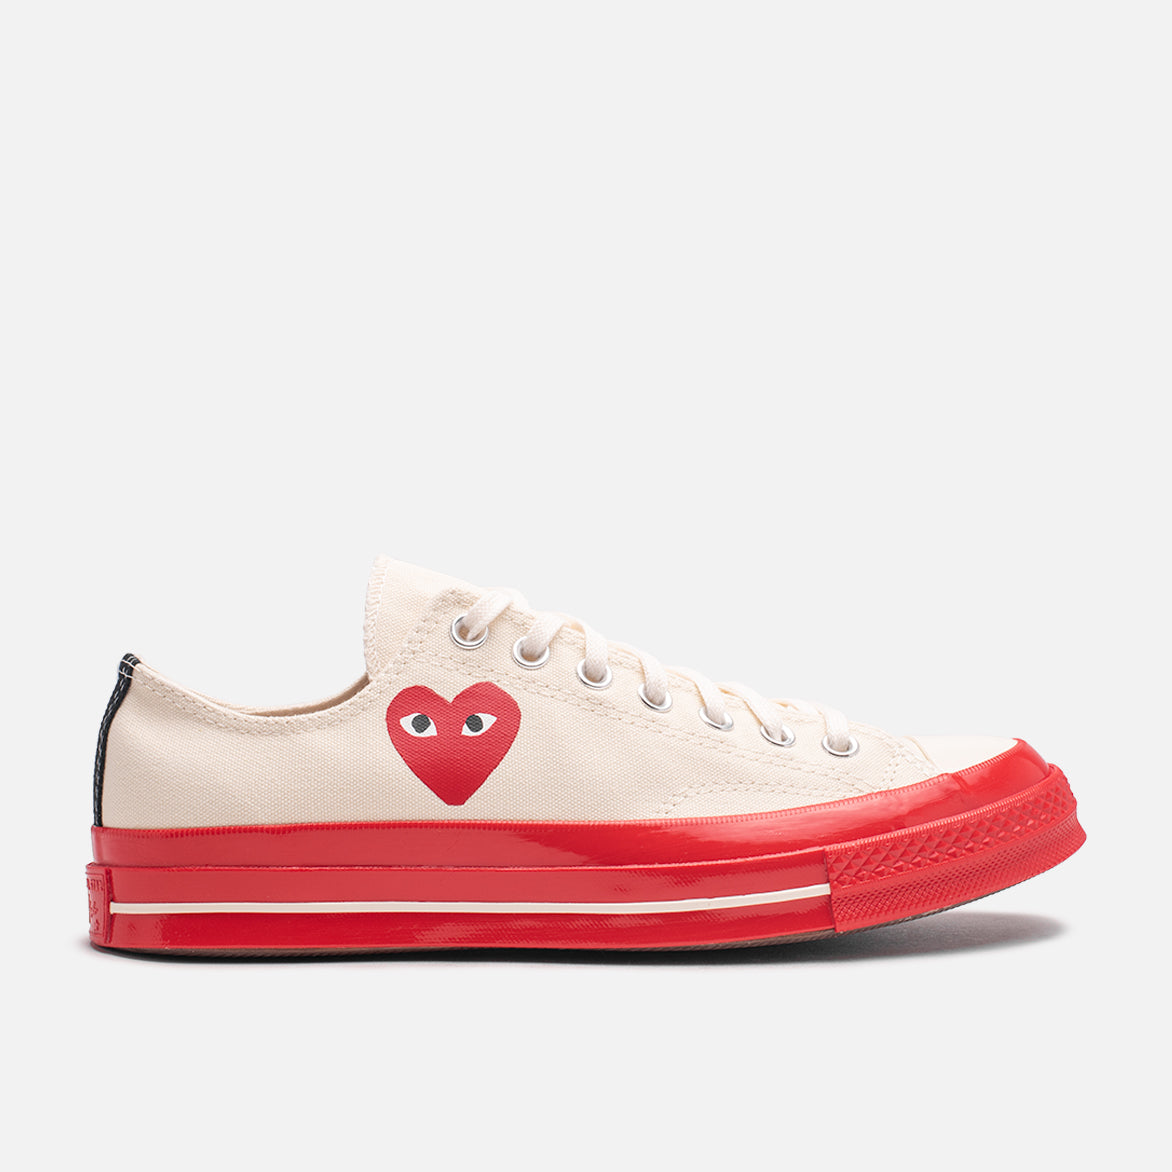 Lejlighedsvis jazz Bowling CDG PLAY X CONVERSE CHUCK 70 OX - PRISTINE / RED | lapstoneandhammer.com